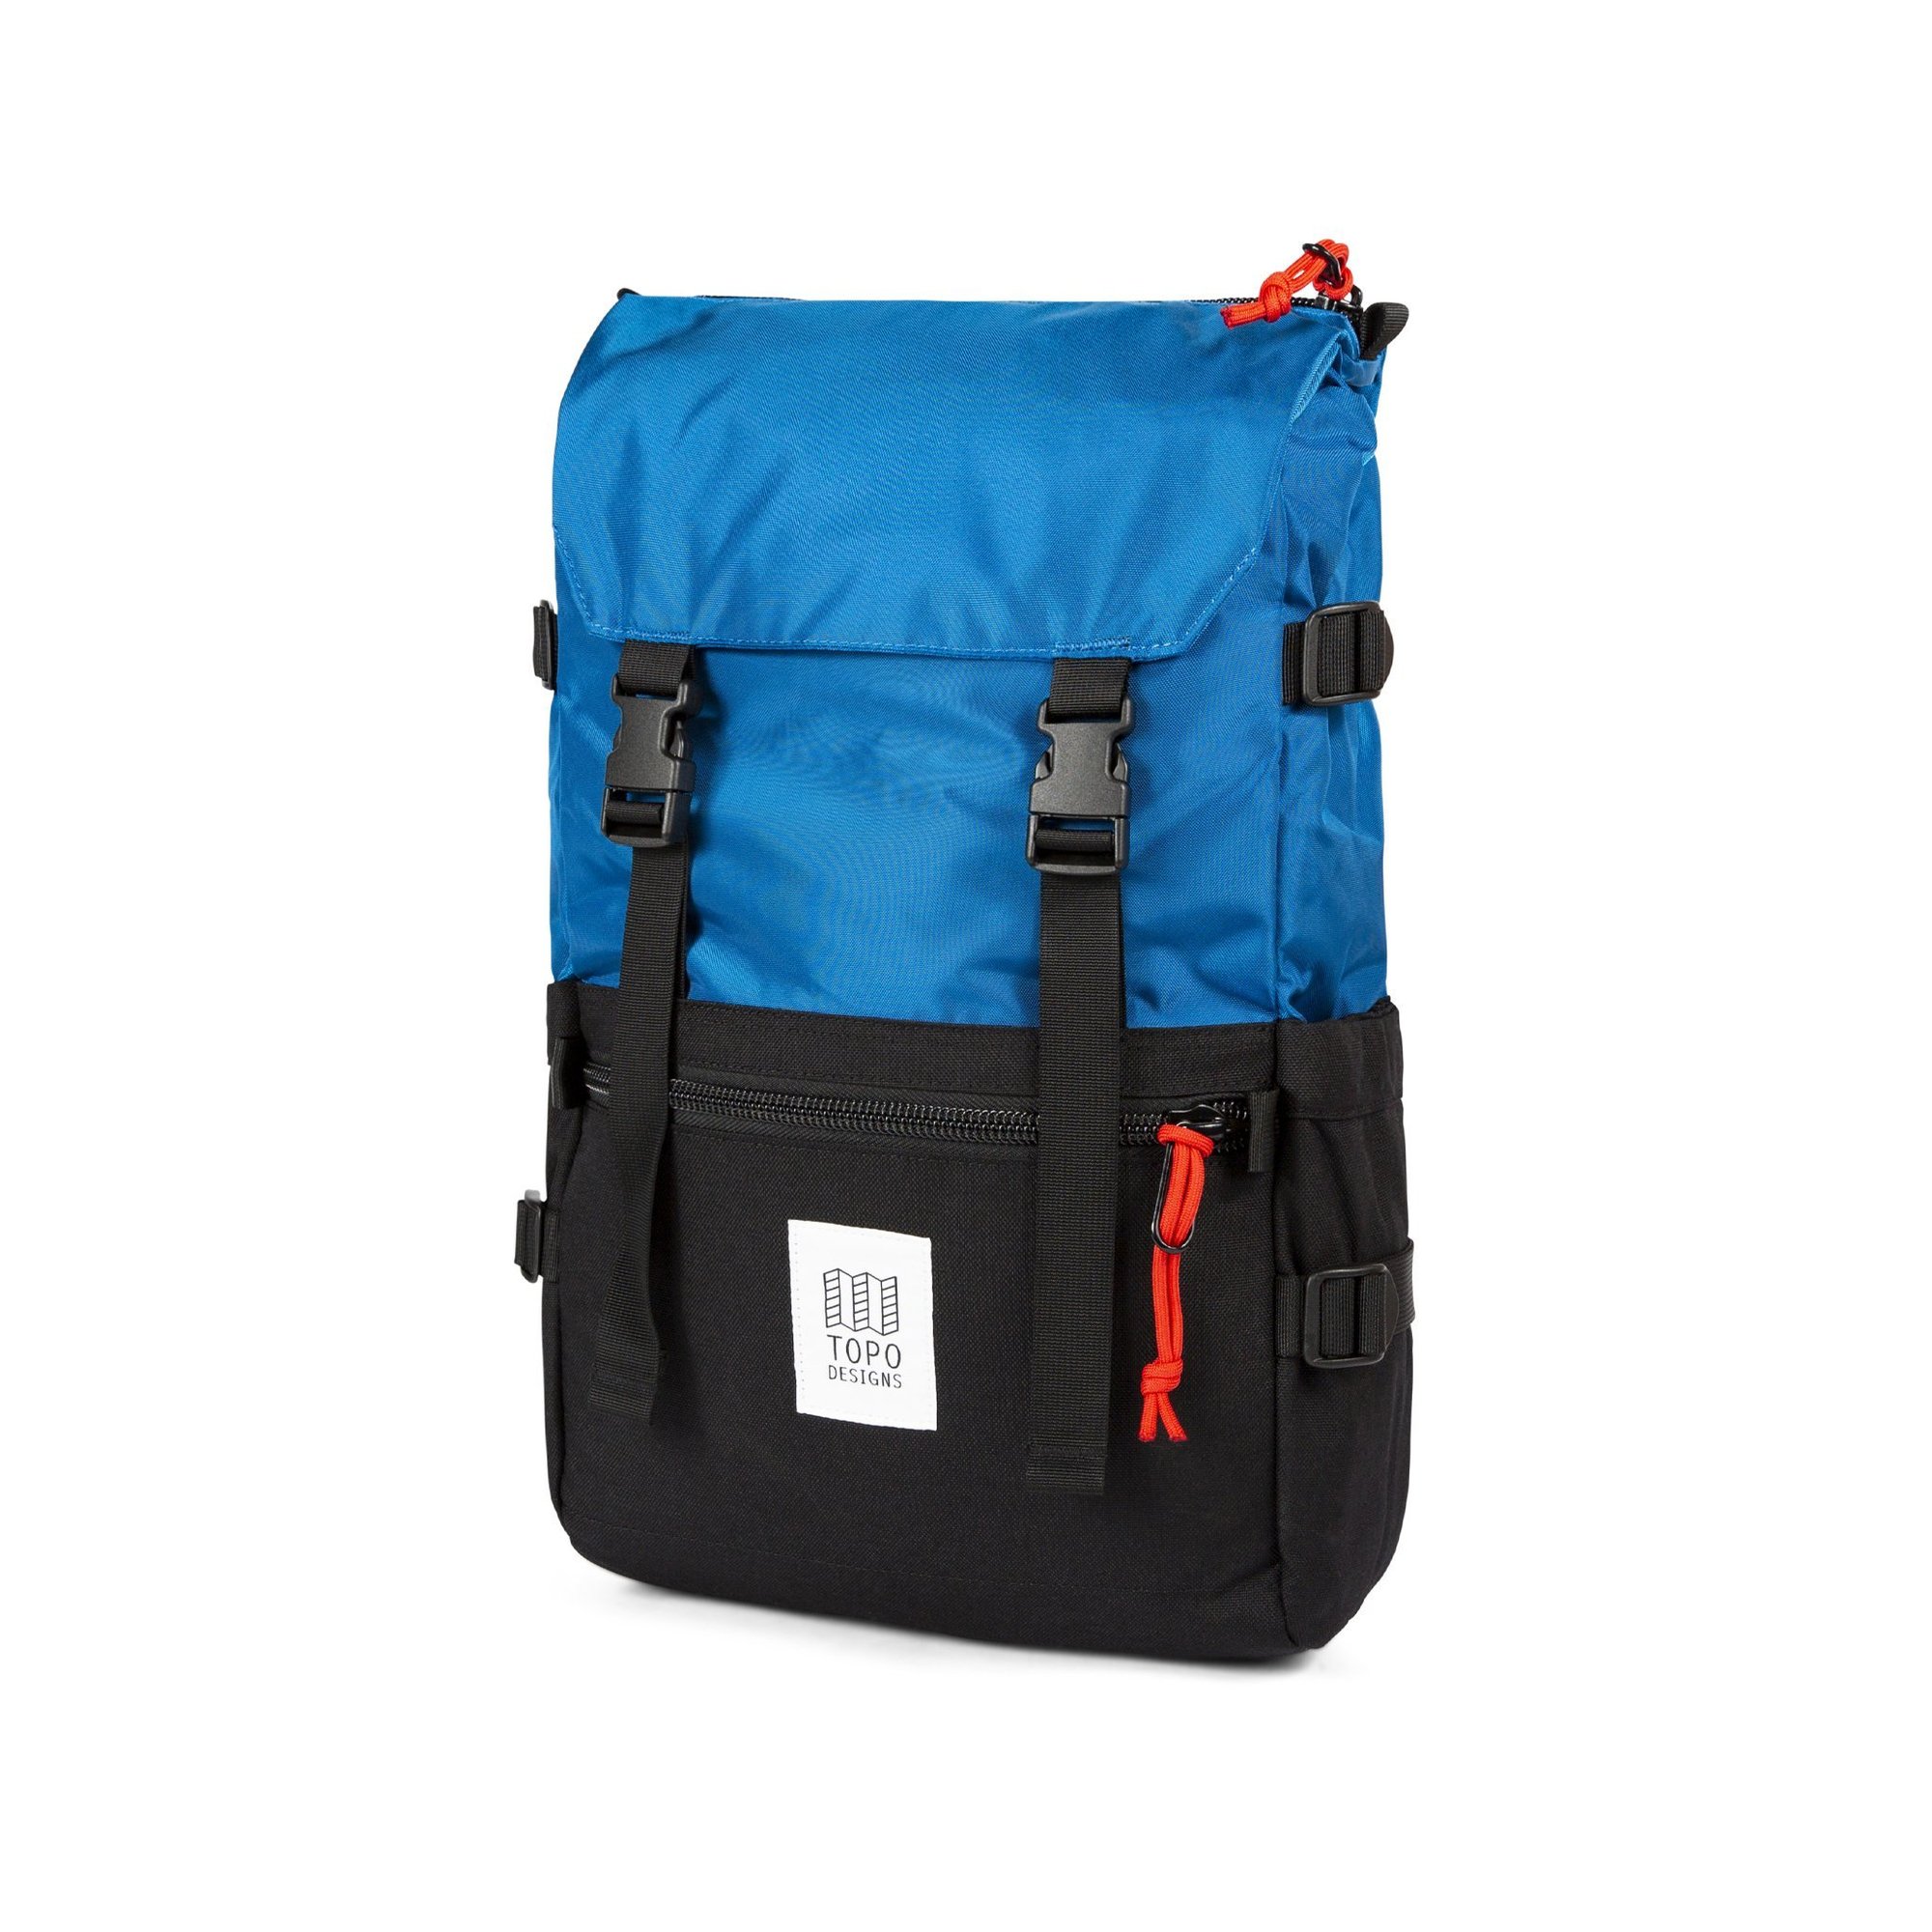 Topo designs rover backpack plus more $49.99 free shipping